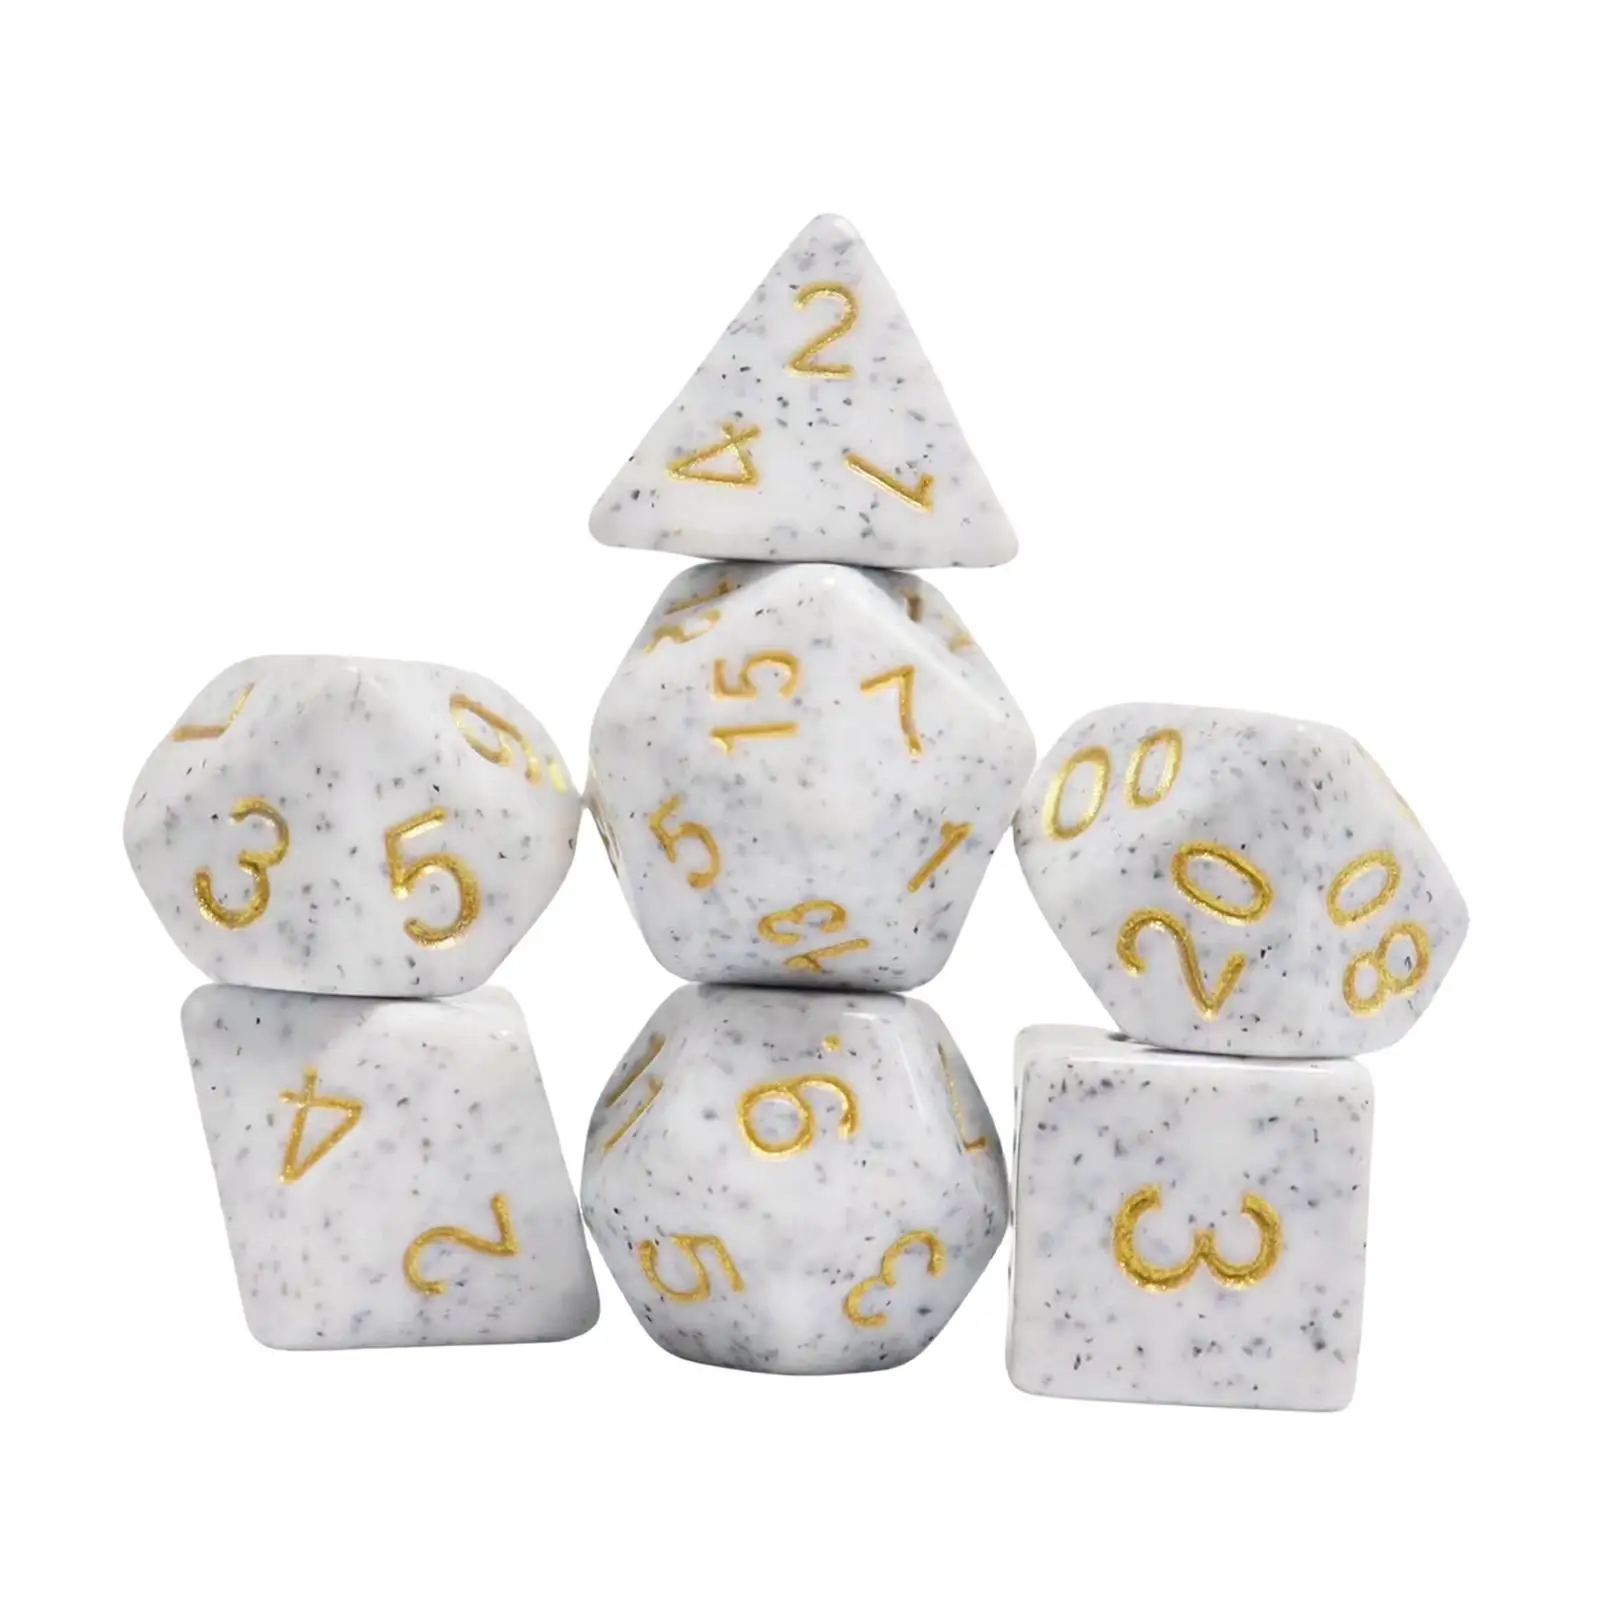 7Pcs Multi Sided Game Dices Party Favors Math Counting Teaching Aids Polyhedral Dices for Party Bar KTV Card Games Table Game